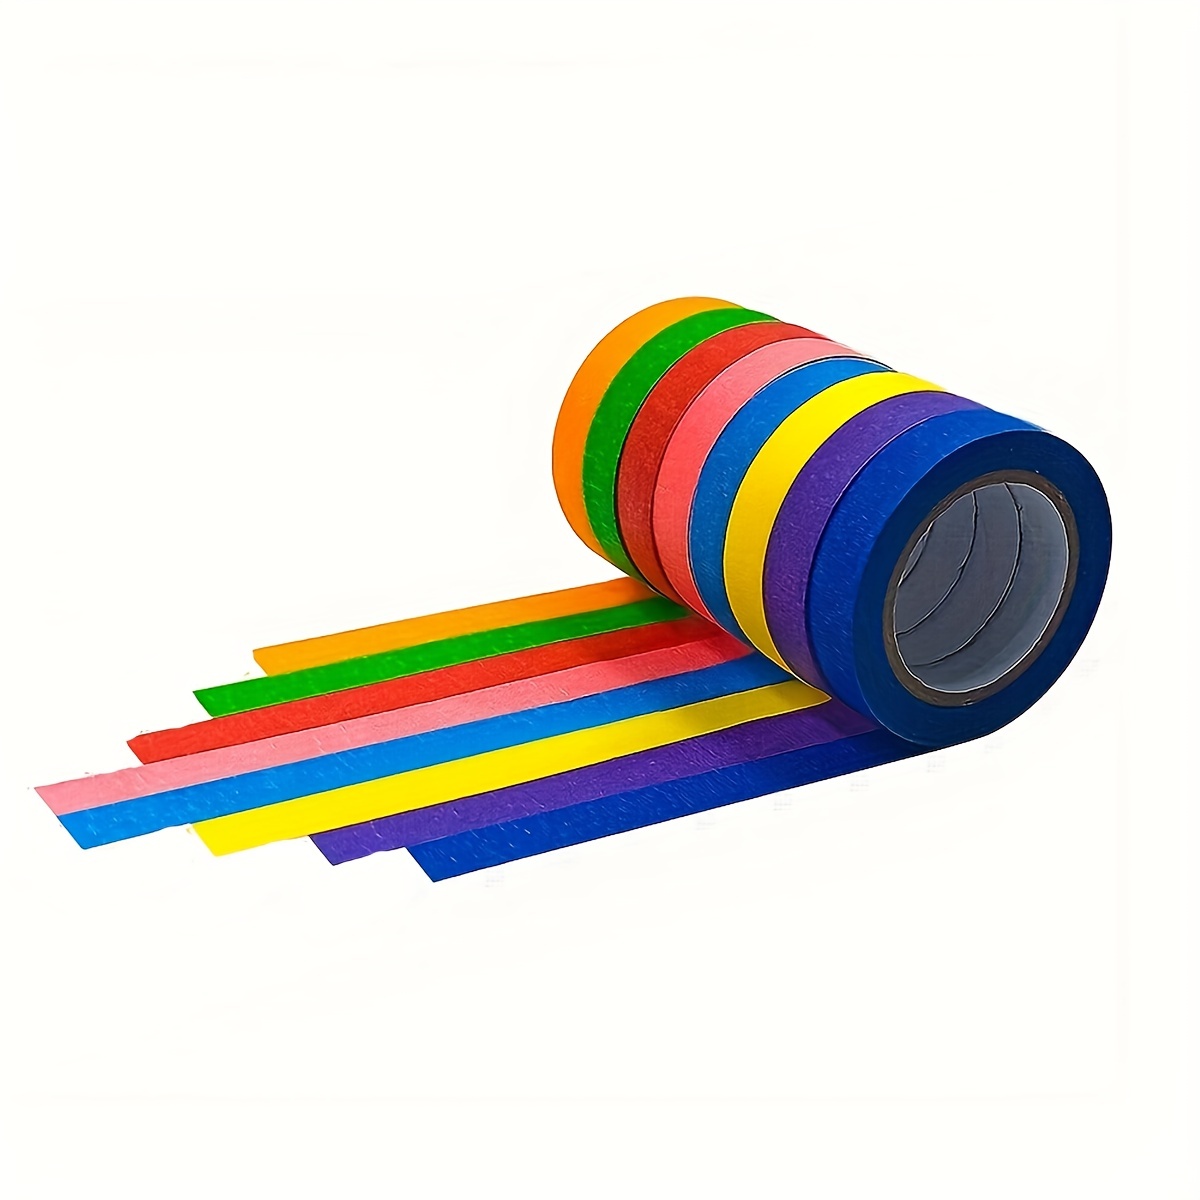 27pcs Colored Tape, Colored Masking Tape Painter Tape, Colored Tape Rolls  Art Supplies For Color Tape, Colorful Tape 9 Colors, 16.4FT/Roll